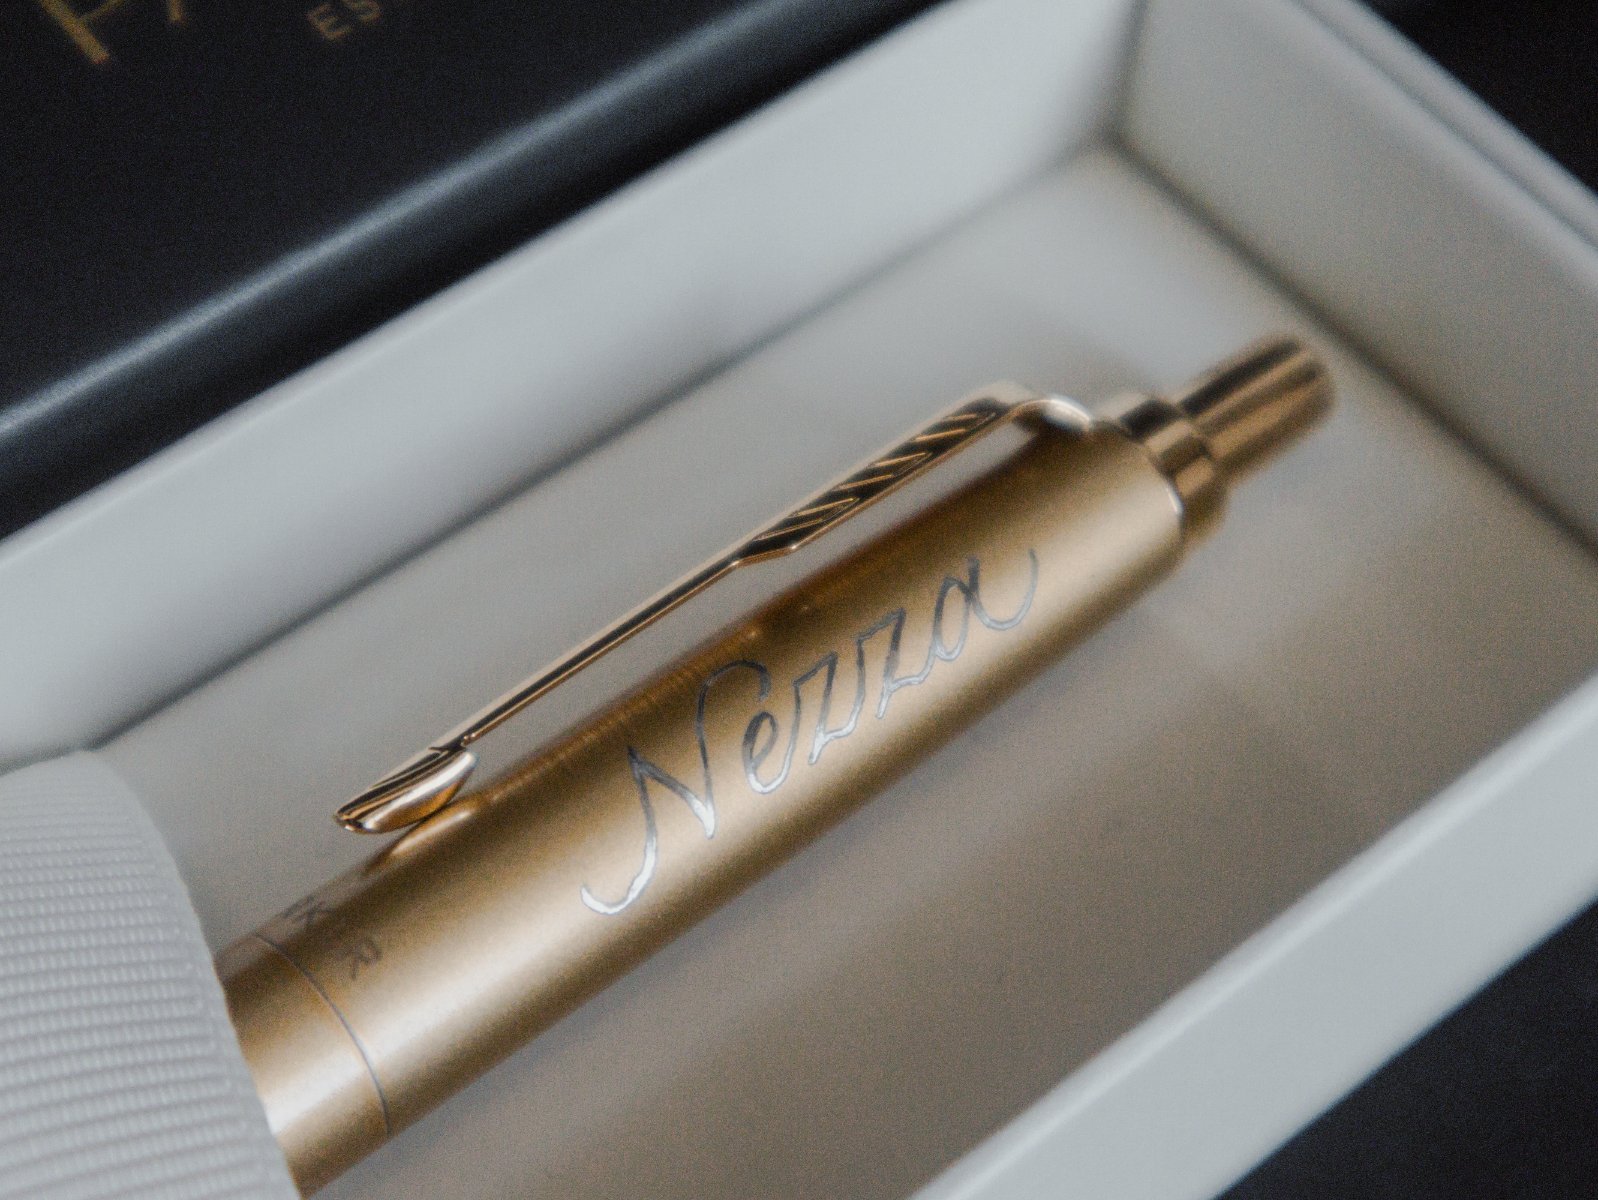 First Name Calligraphy Engraving on Parker Pens for Bloomberg 5.jpg